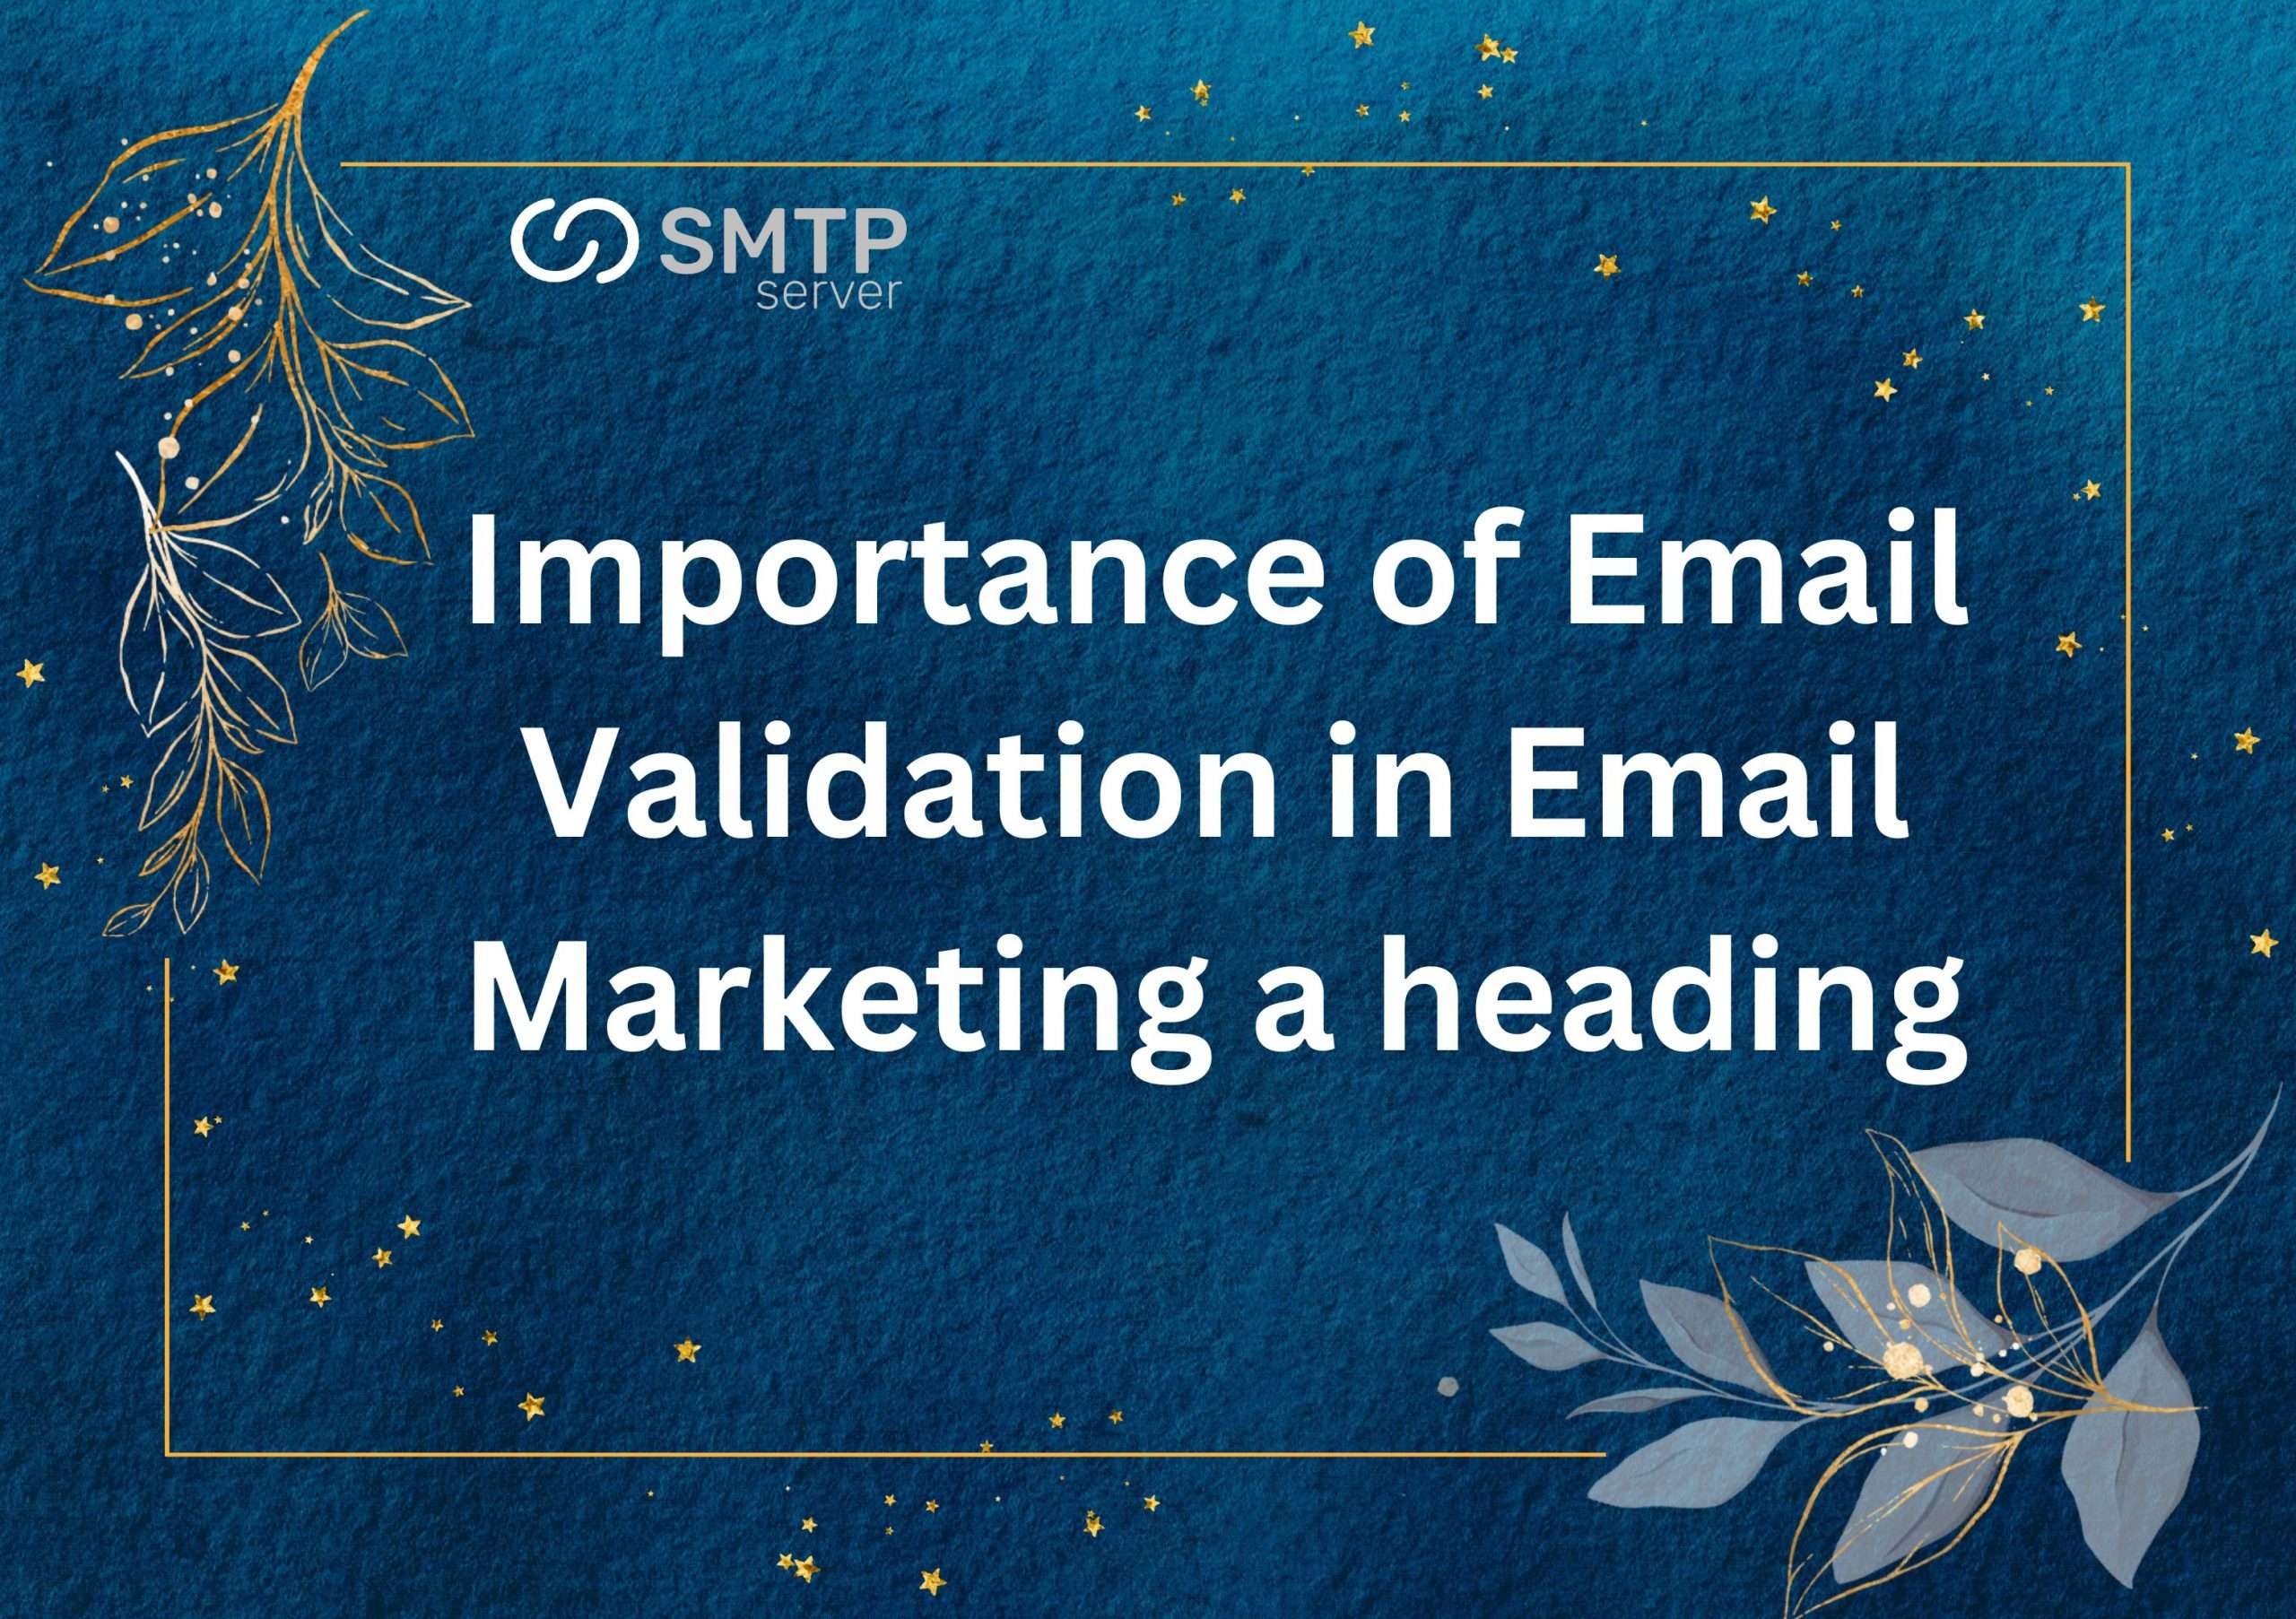 Importance of Email Validation in Email Marketing